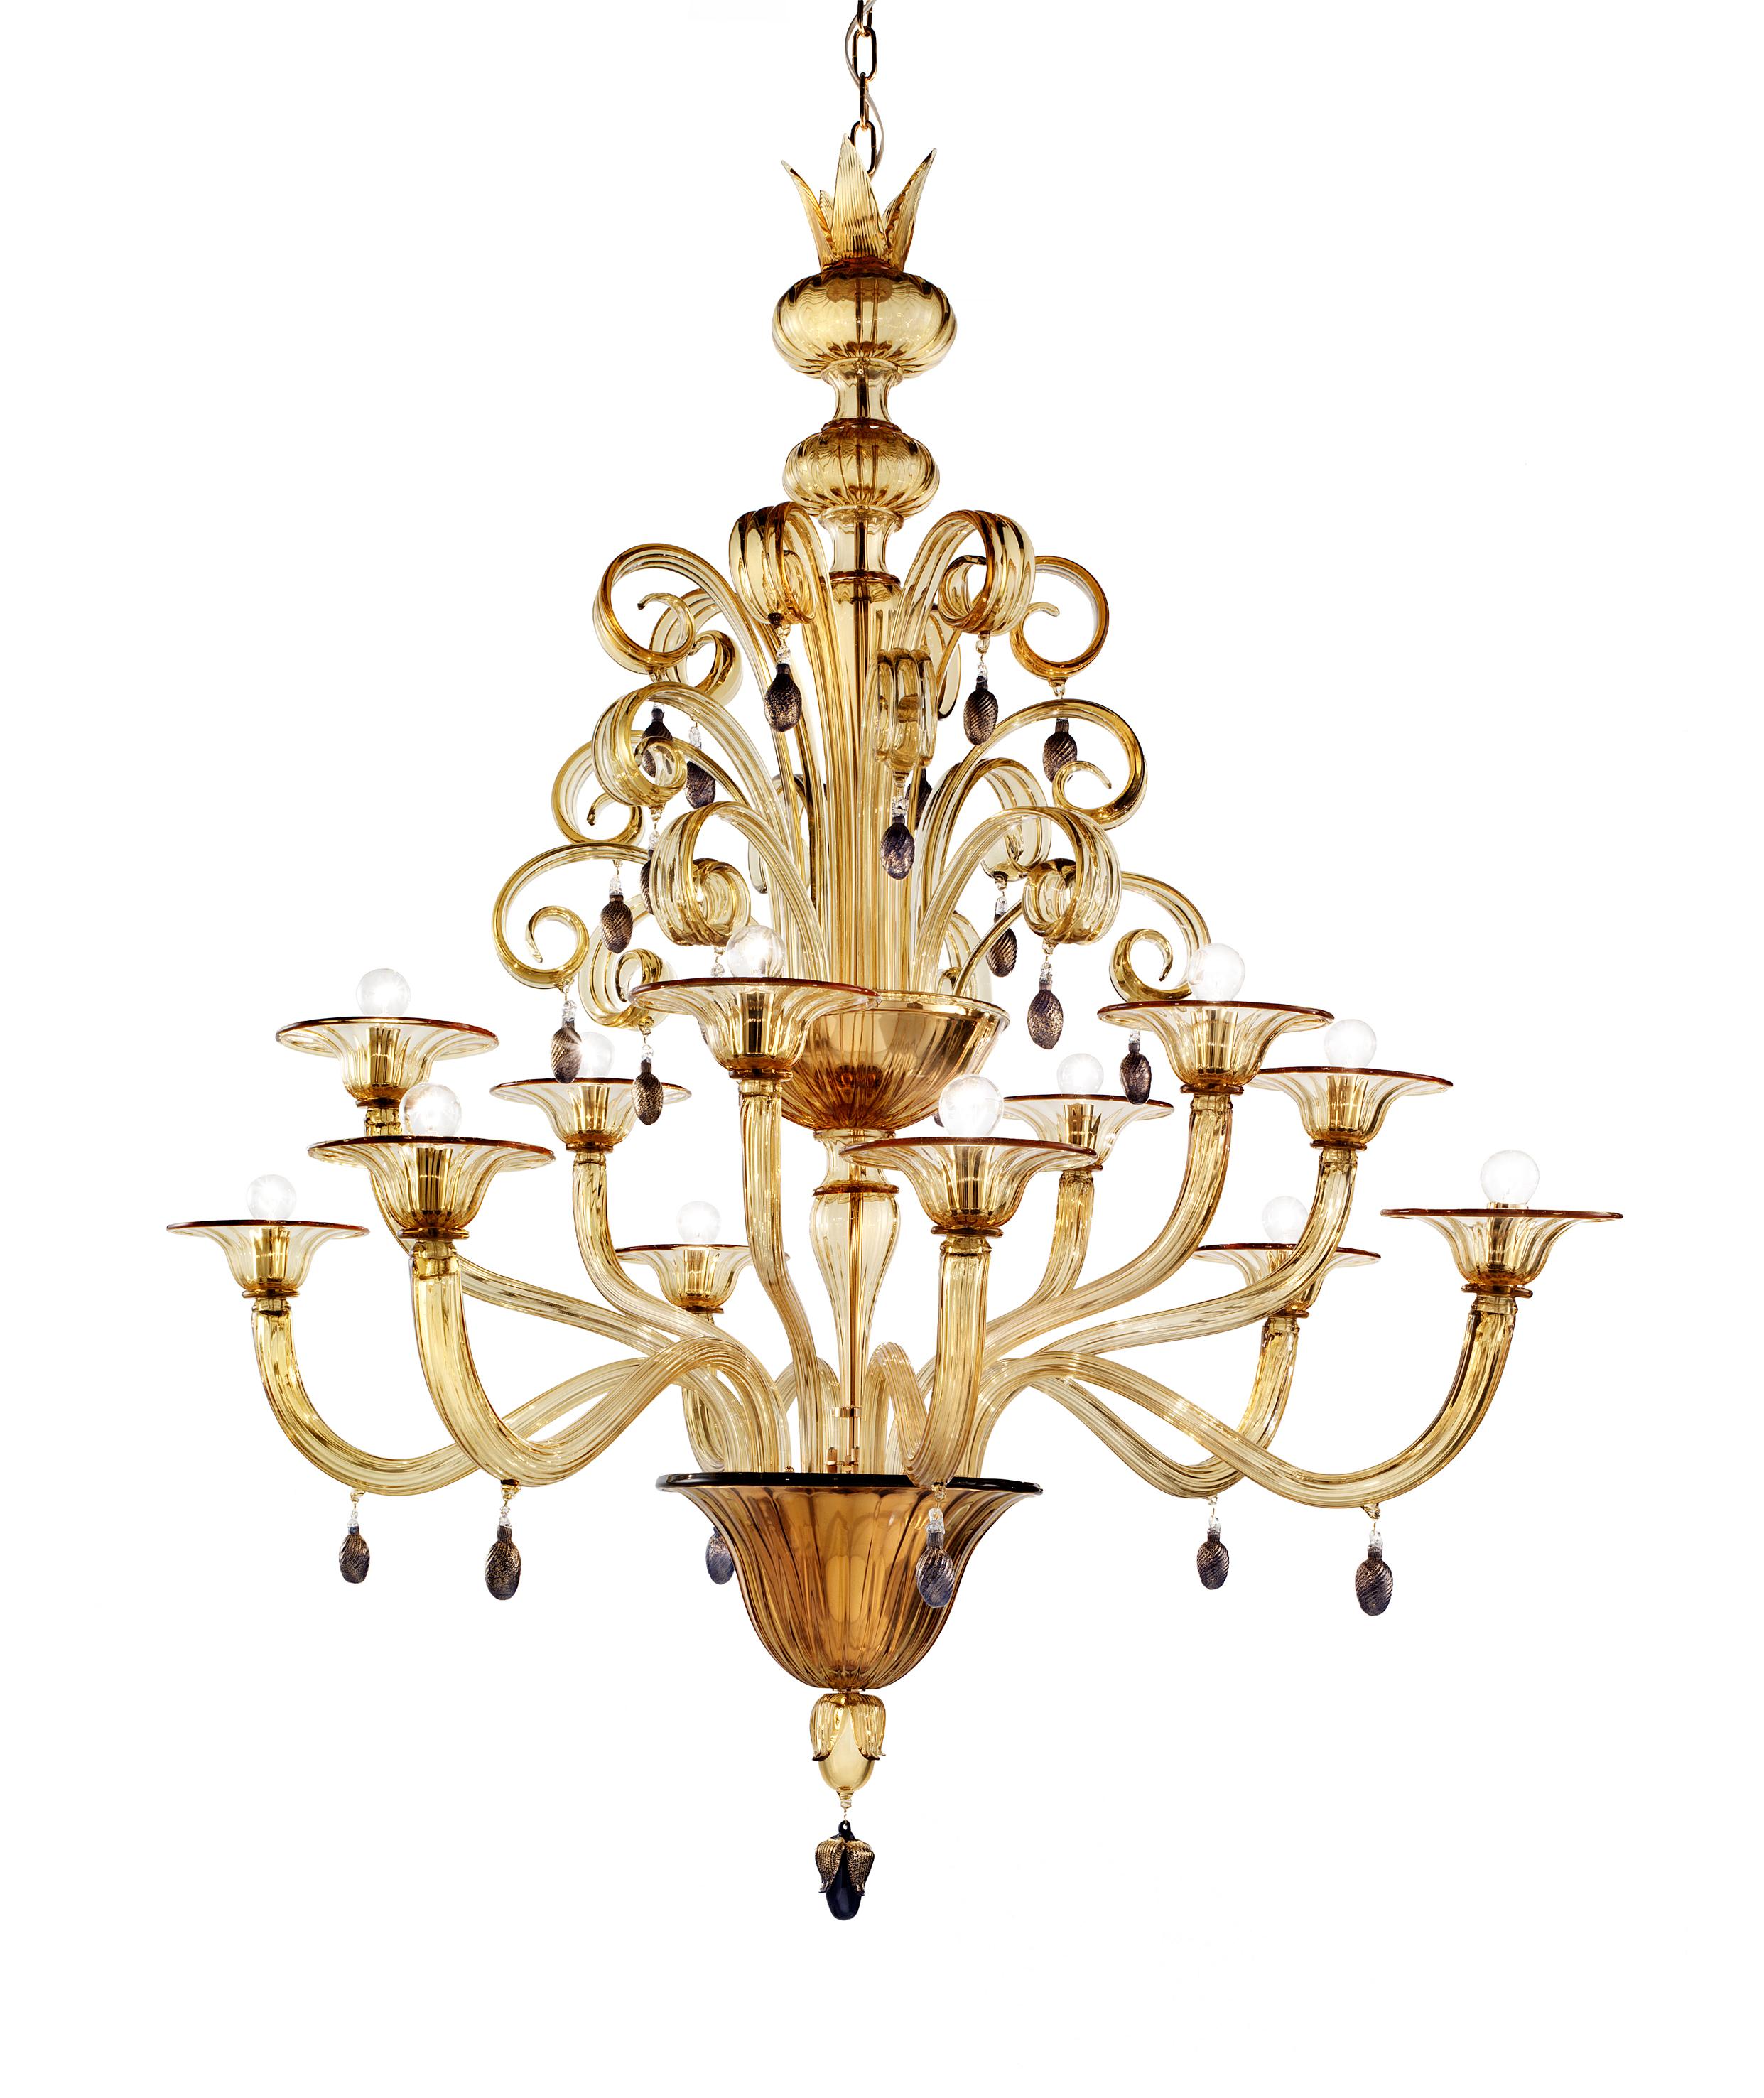 Vittoriale chandelier, designed by Napoleone Martinuzzi and manufactured by Venini, features a blown glass body with gold plated metal chain. Originally designed in 1926 is available with 6 or 12 arms. Numbered edition per year. Indoor use